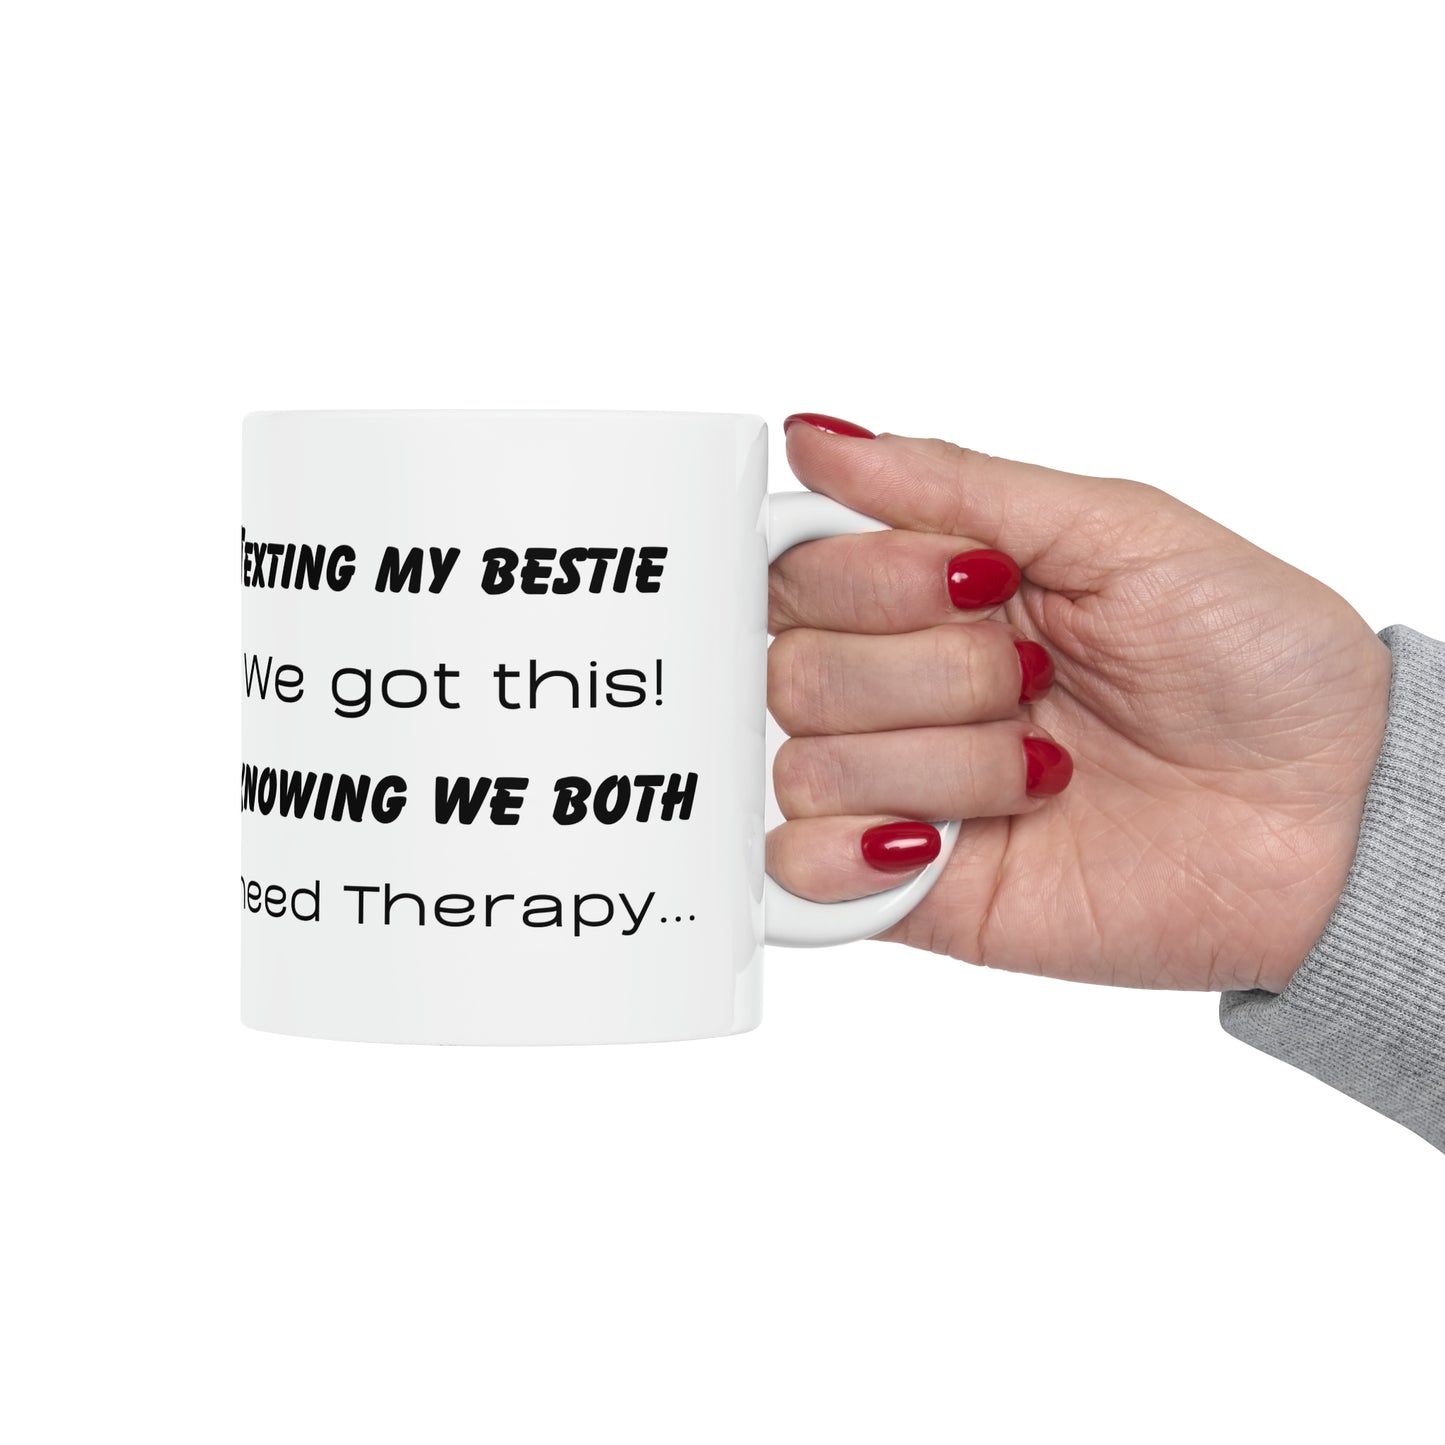 Texting my bestie, we got this! Knowing we both need therapy! Ceramic Coffee Cups, 11oz, 15oz